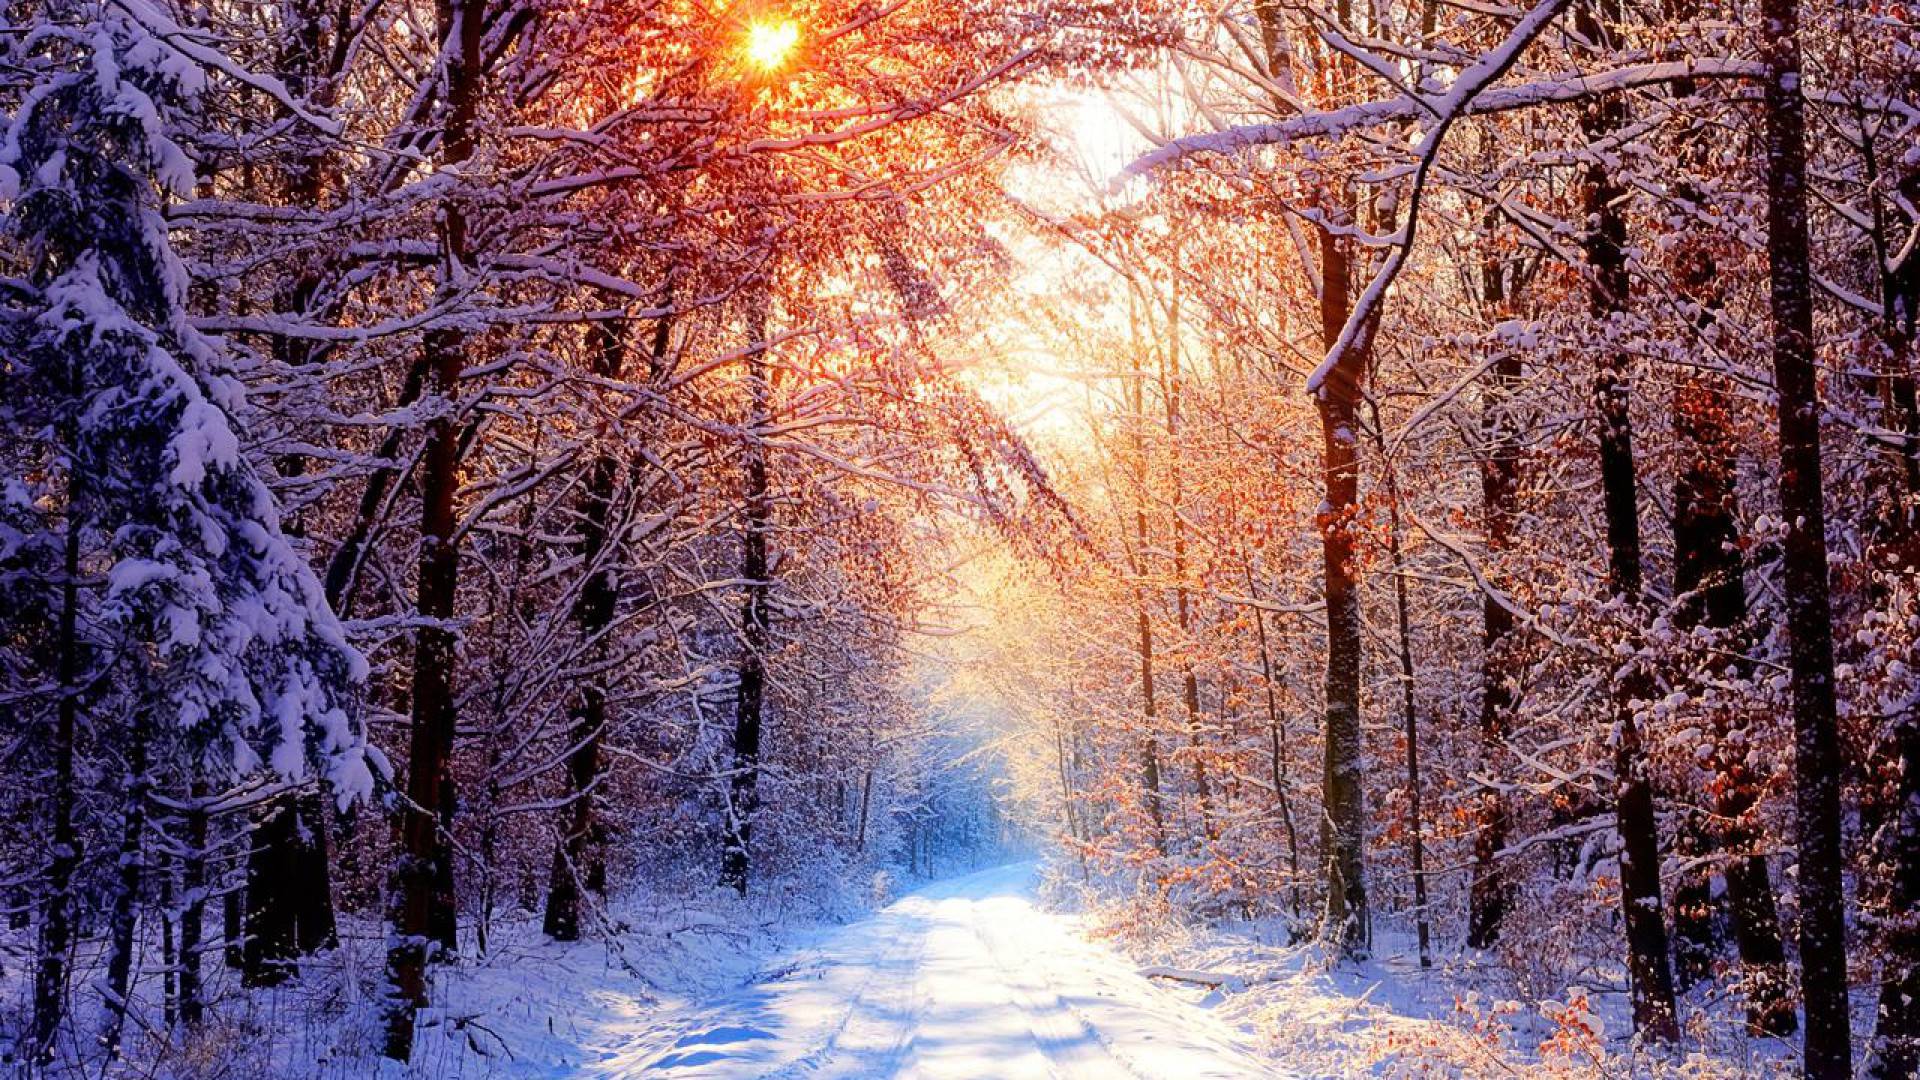 Like or share Creek Winter Forest Wallpapers X Winter Snowy Forest